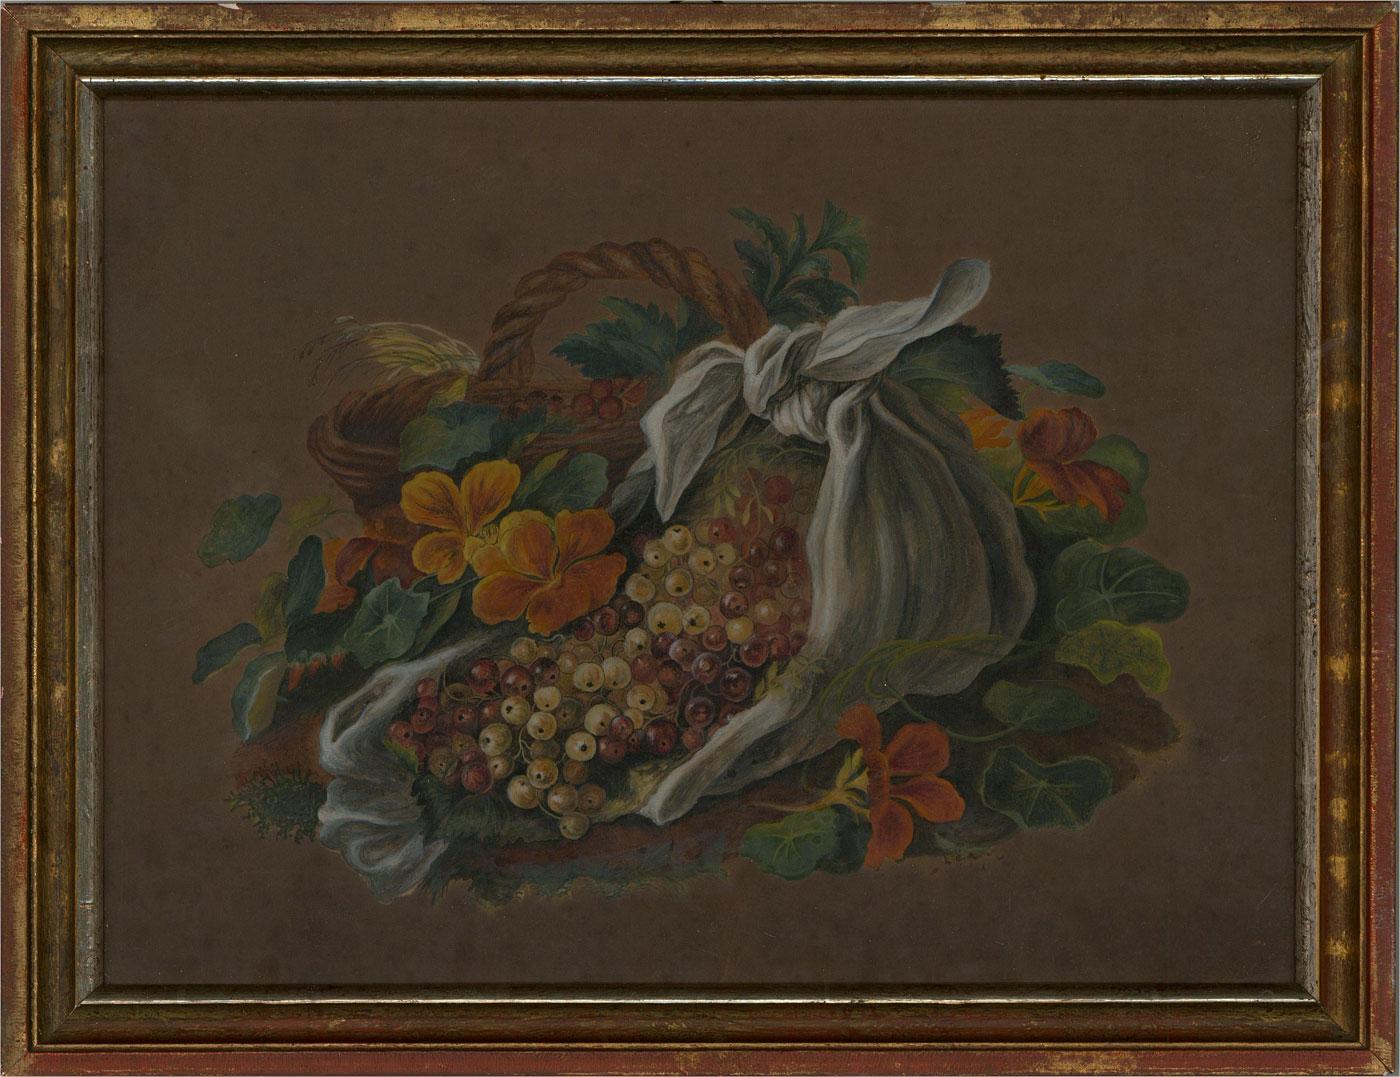 A pretty cornucopia of elderberries and nasturtiums, tumble out from a knotted linen cloth and wicker basket. This wholesome still life shoes us the bounty of late Summer and early Autumn in wonderful detail and decorative composition.

The painting